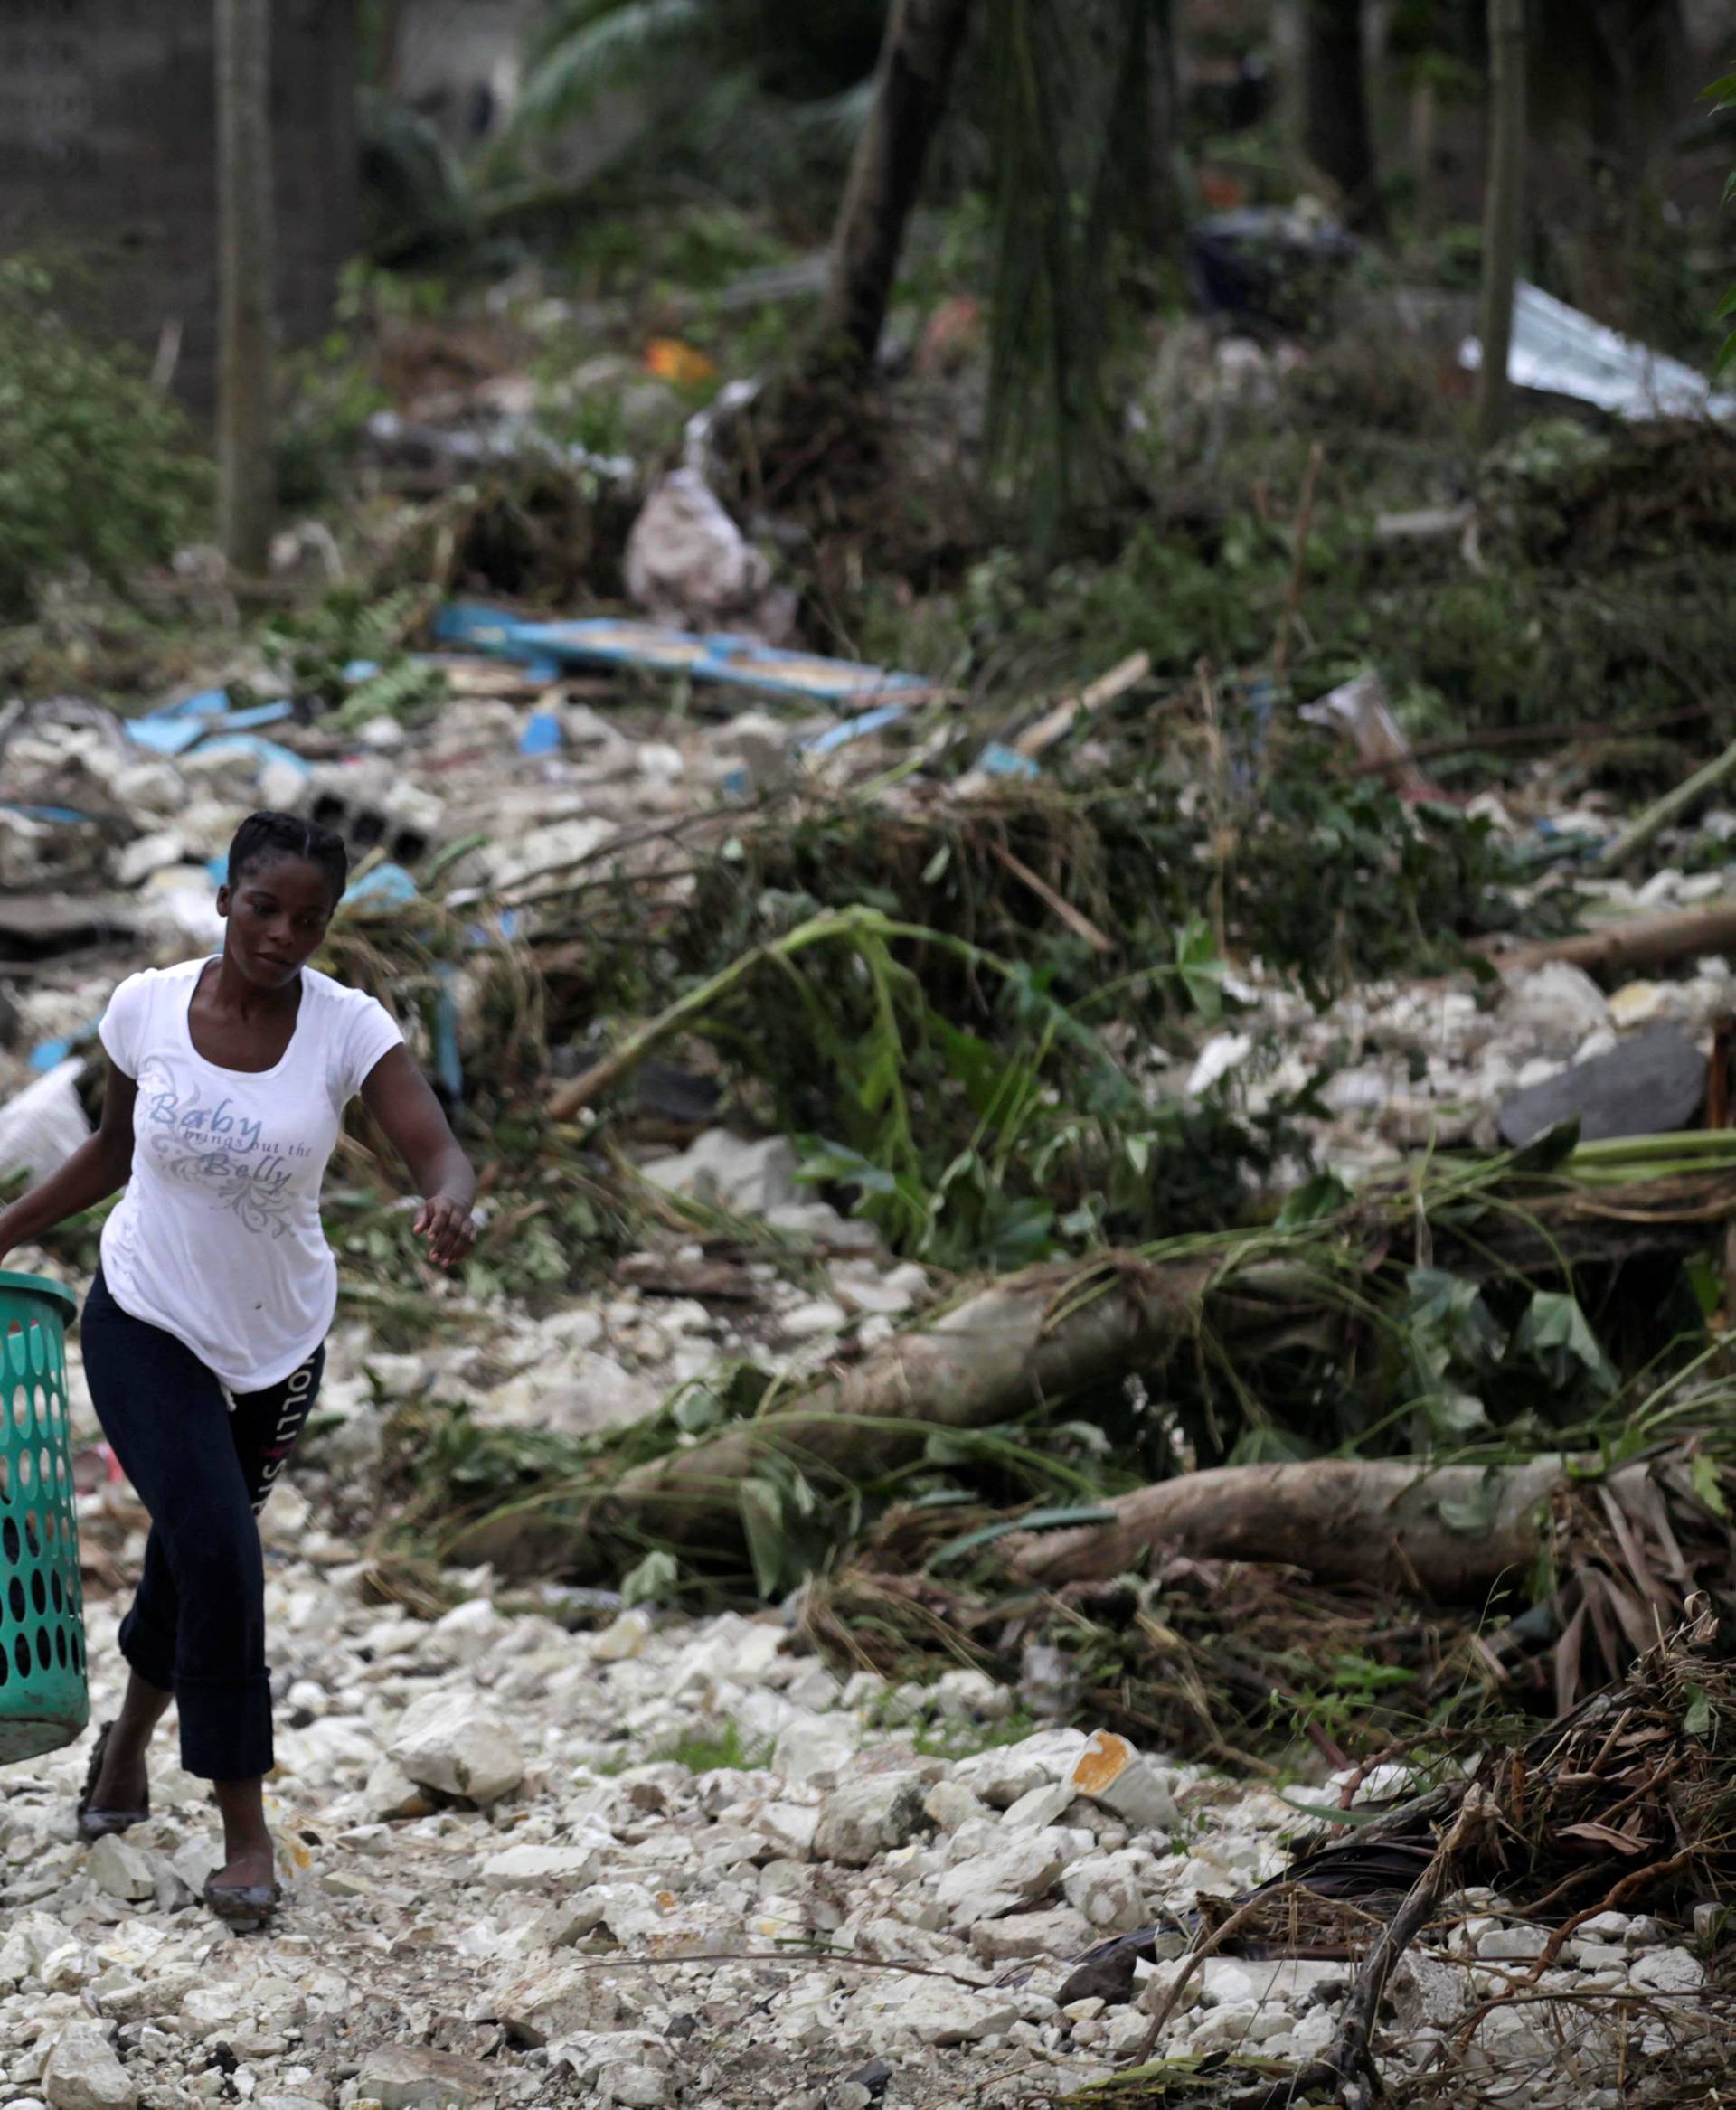 A woman carries a laundry basket in an area devastated by Hurricane Matthew in Cavaillon, Haiti